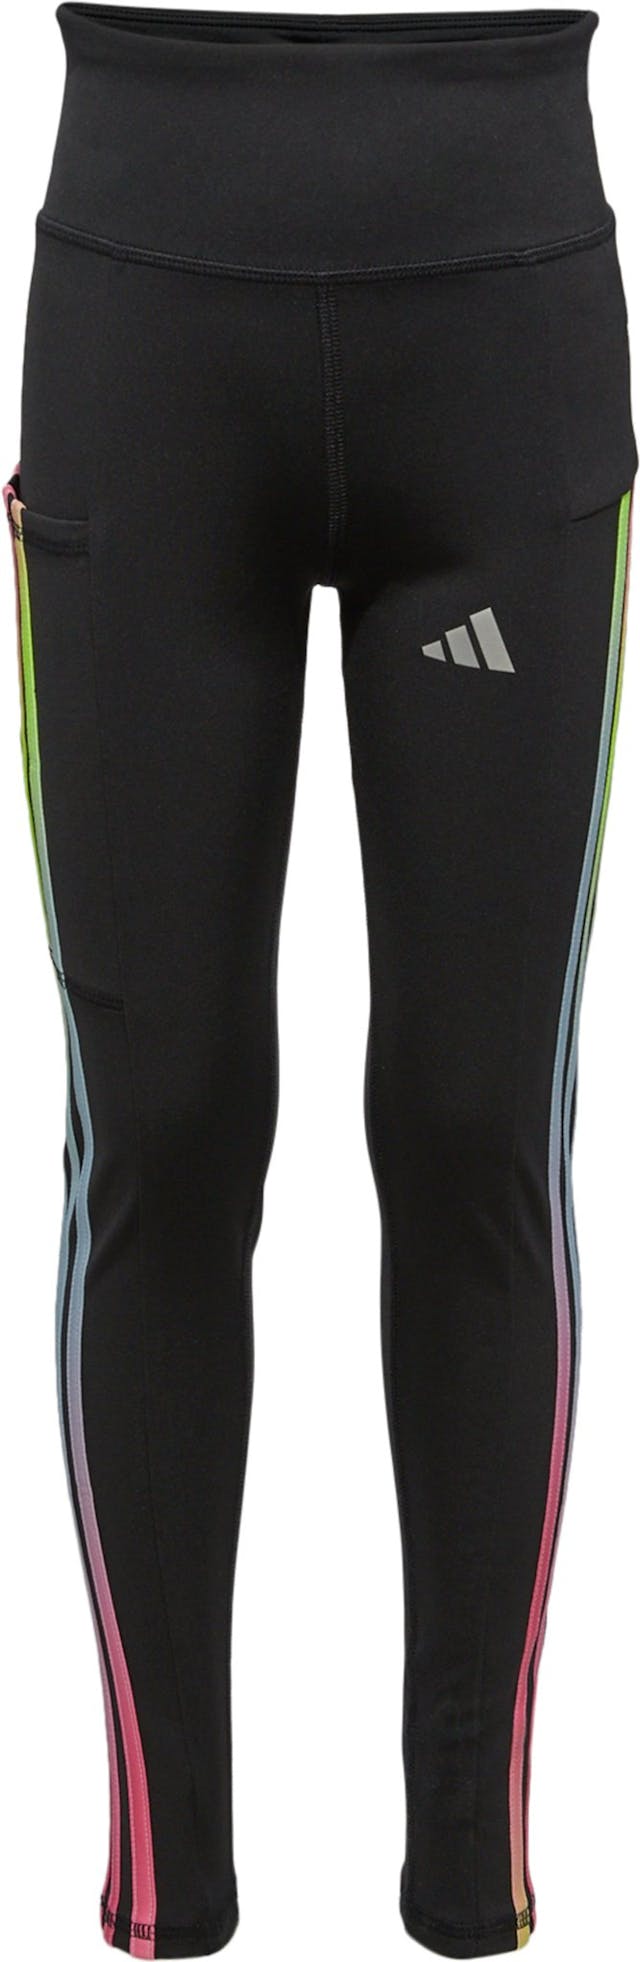 Product image for Three Stripes Cell Pocket Tight - Youth